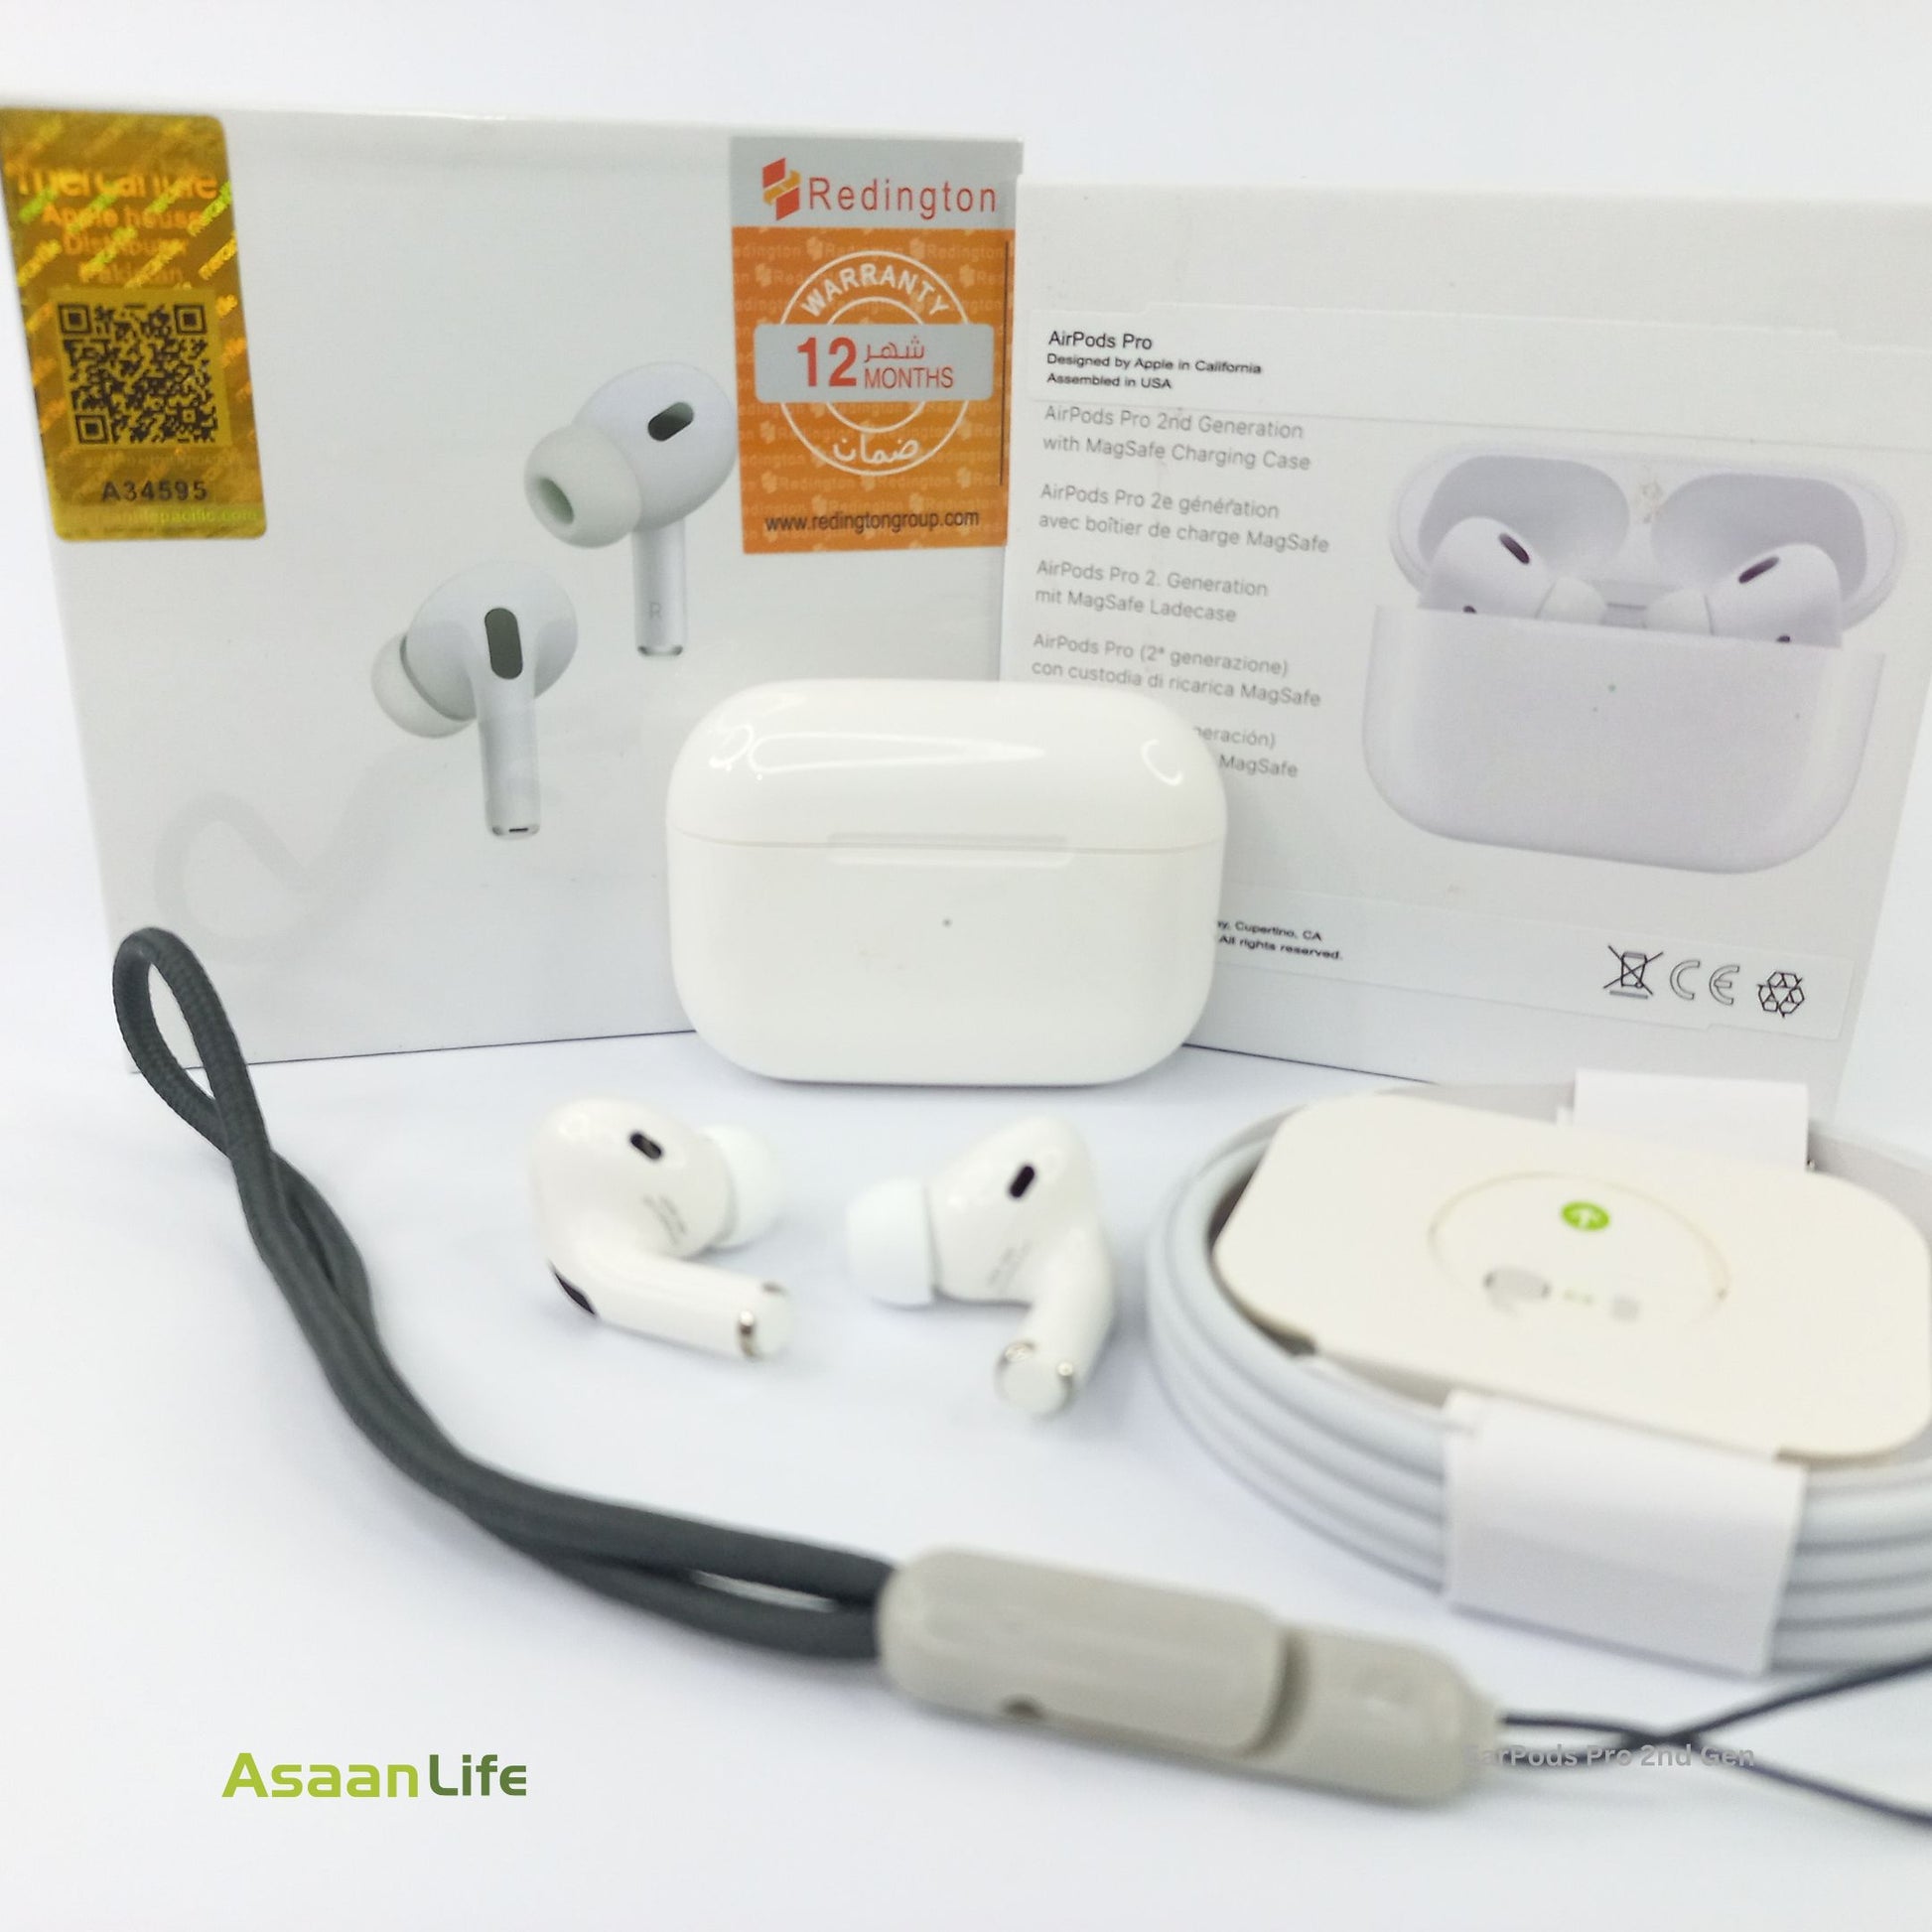 Ultimate EarPods Pro 2nd Gen: Master Copy of Apple AirPods 2nd Gen | White | Free Home Delivery